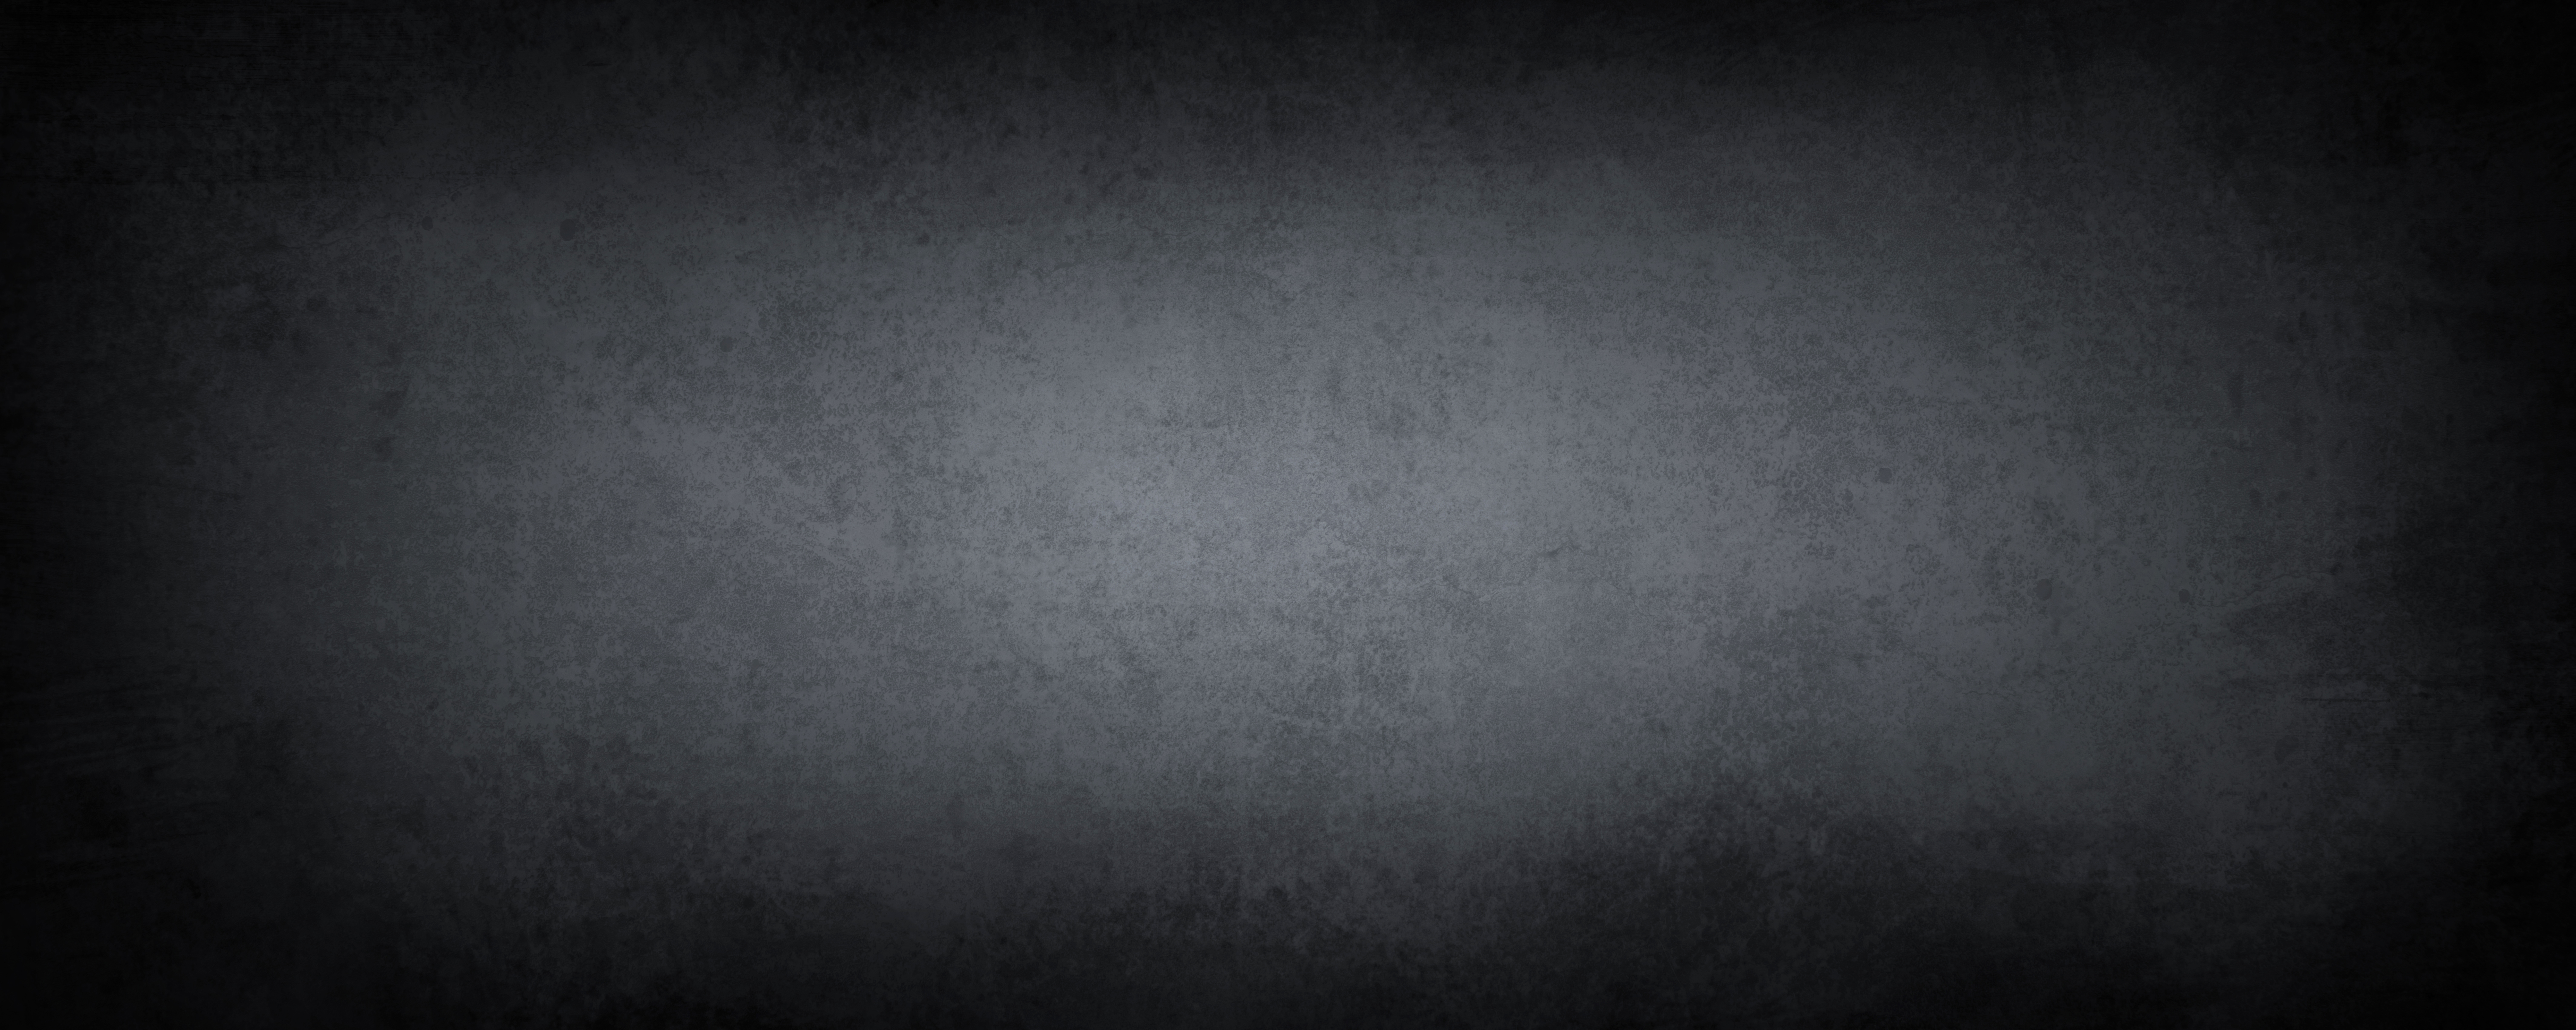 Background Black Stock Photos, Images and Backgrounds for Free Download